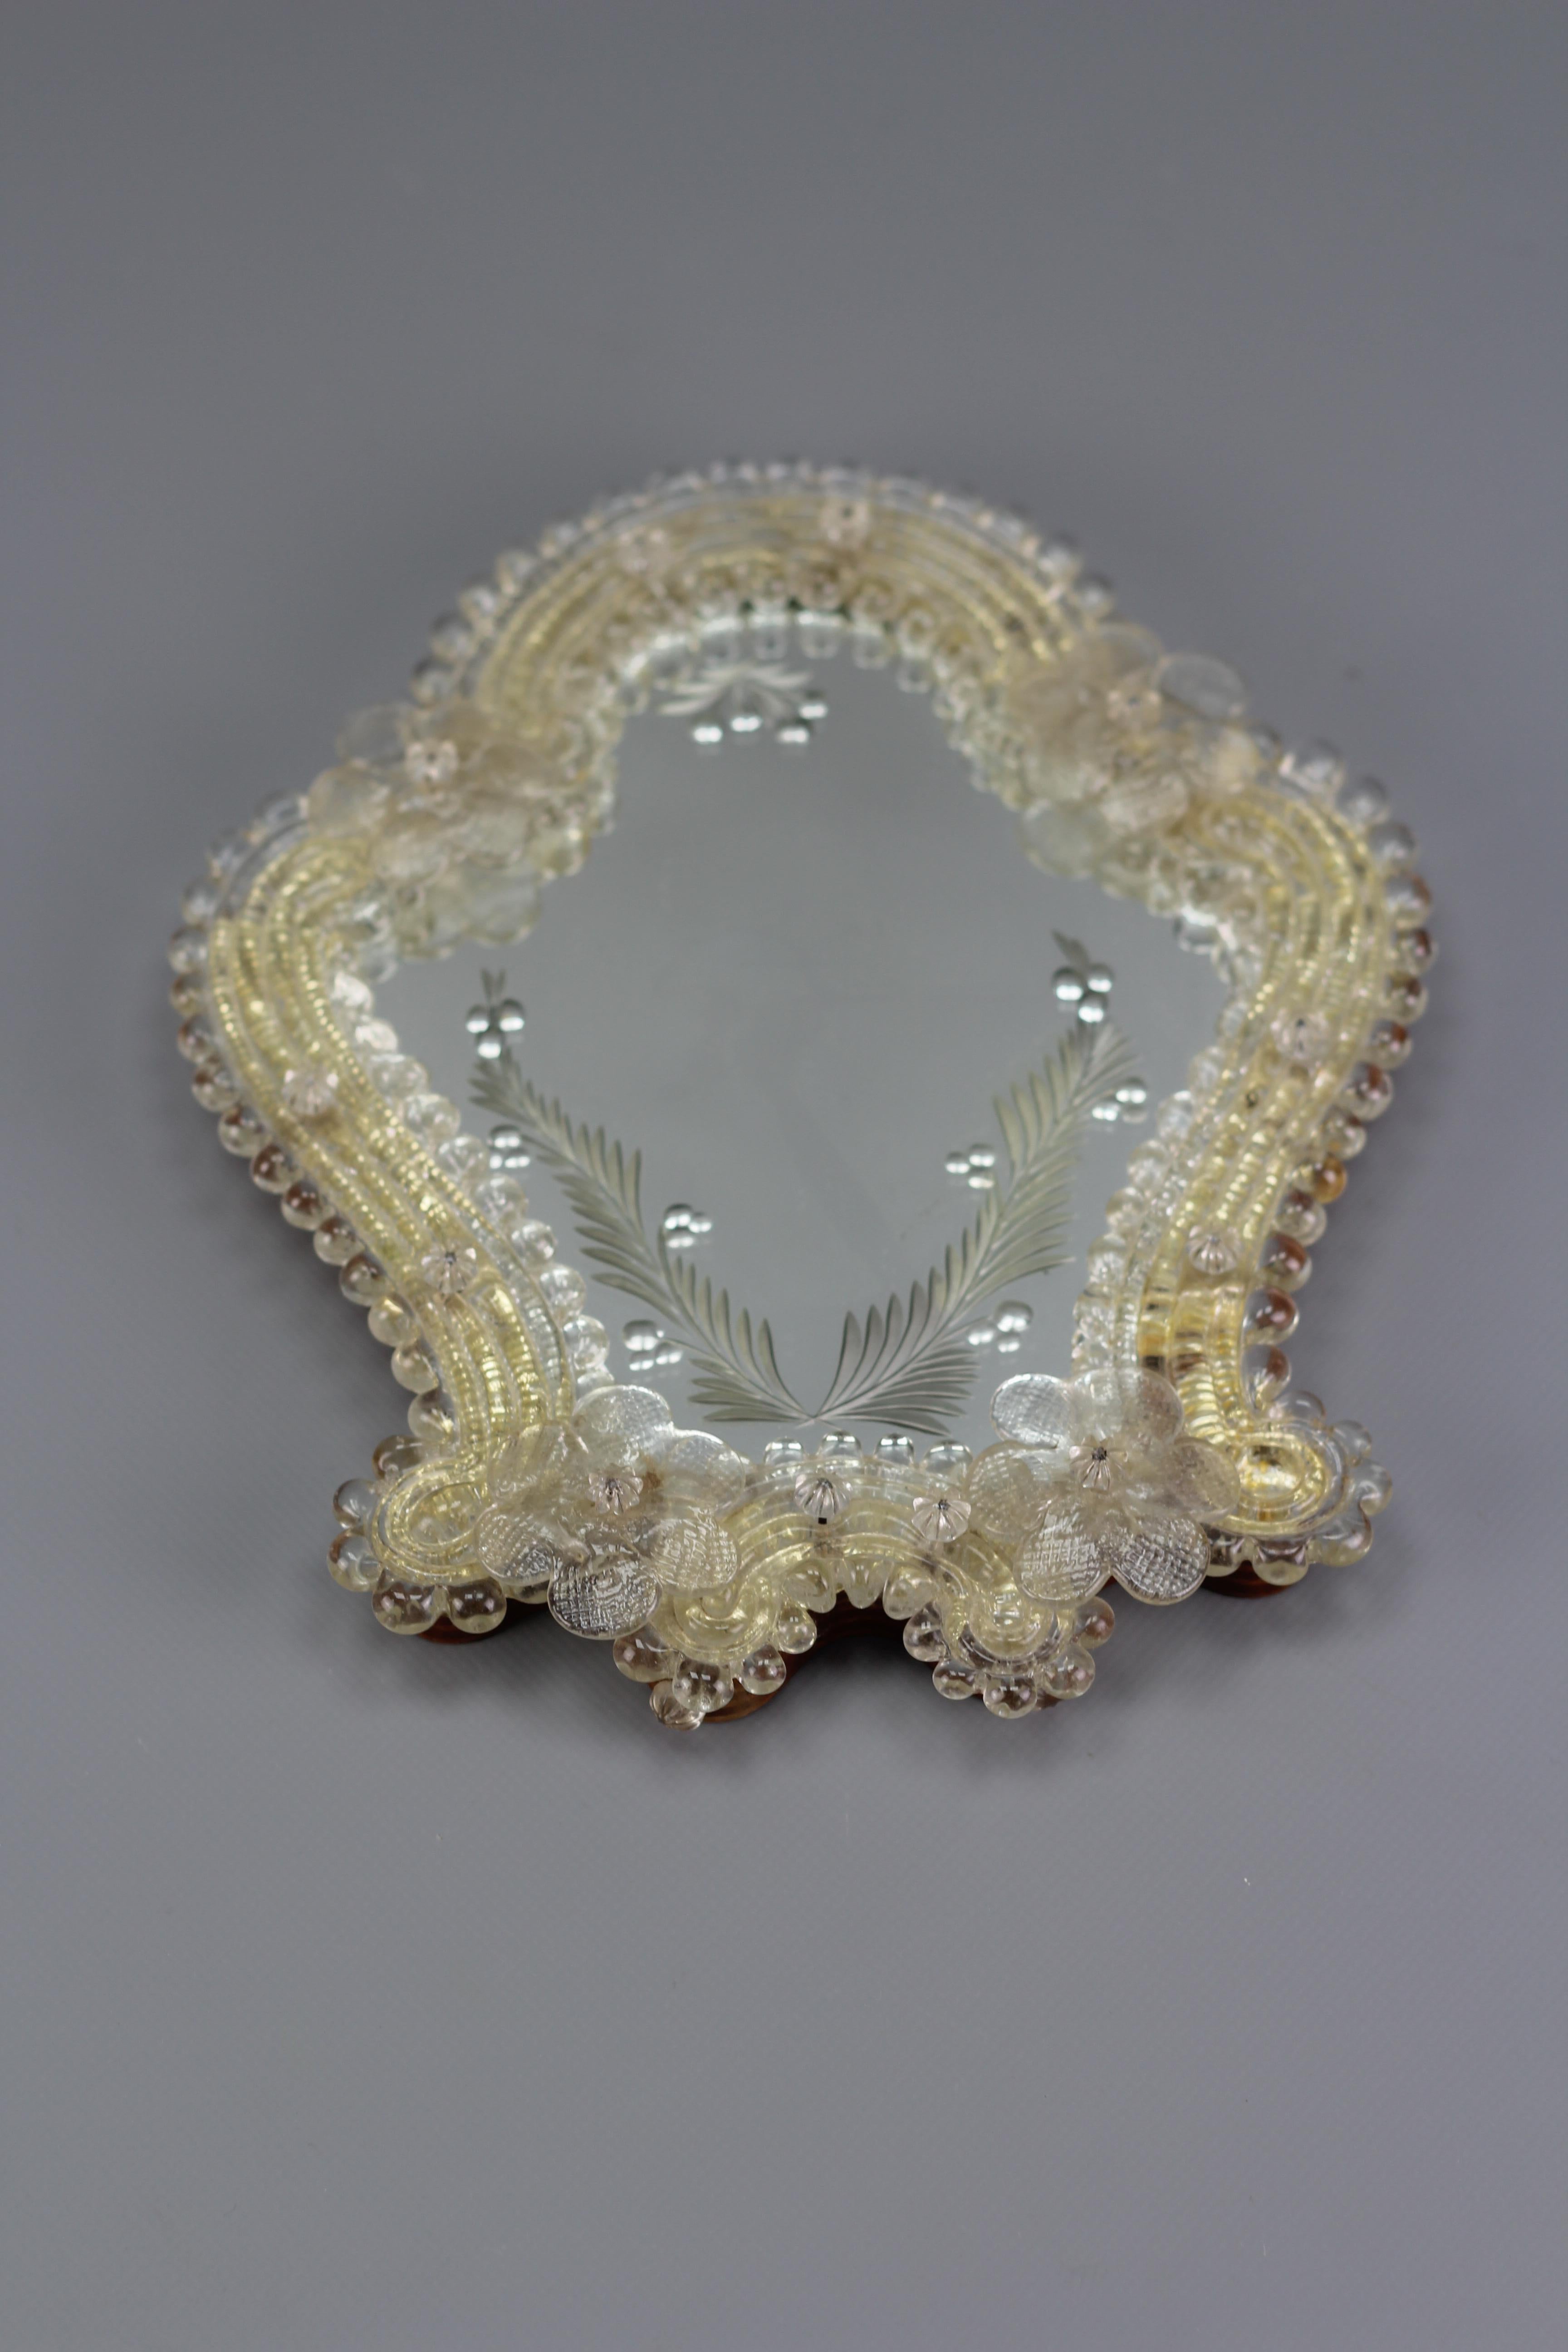 Italian Murano Clear and Light Golden Glass Etched Wall Mirror, circa 1950s For Sale 1